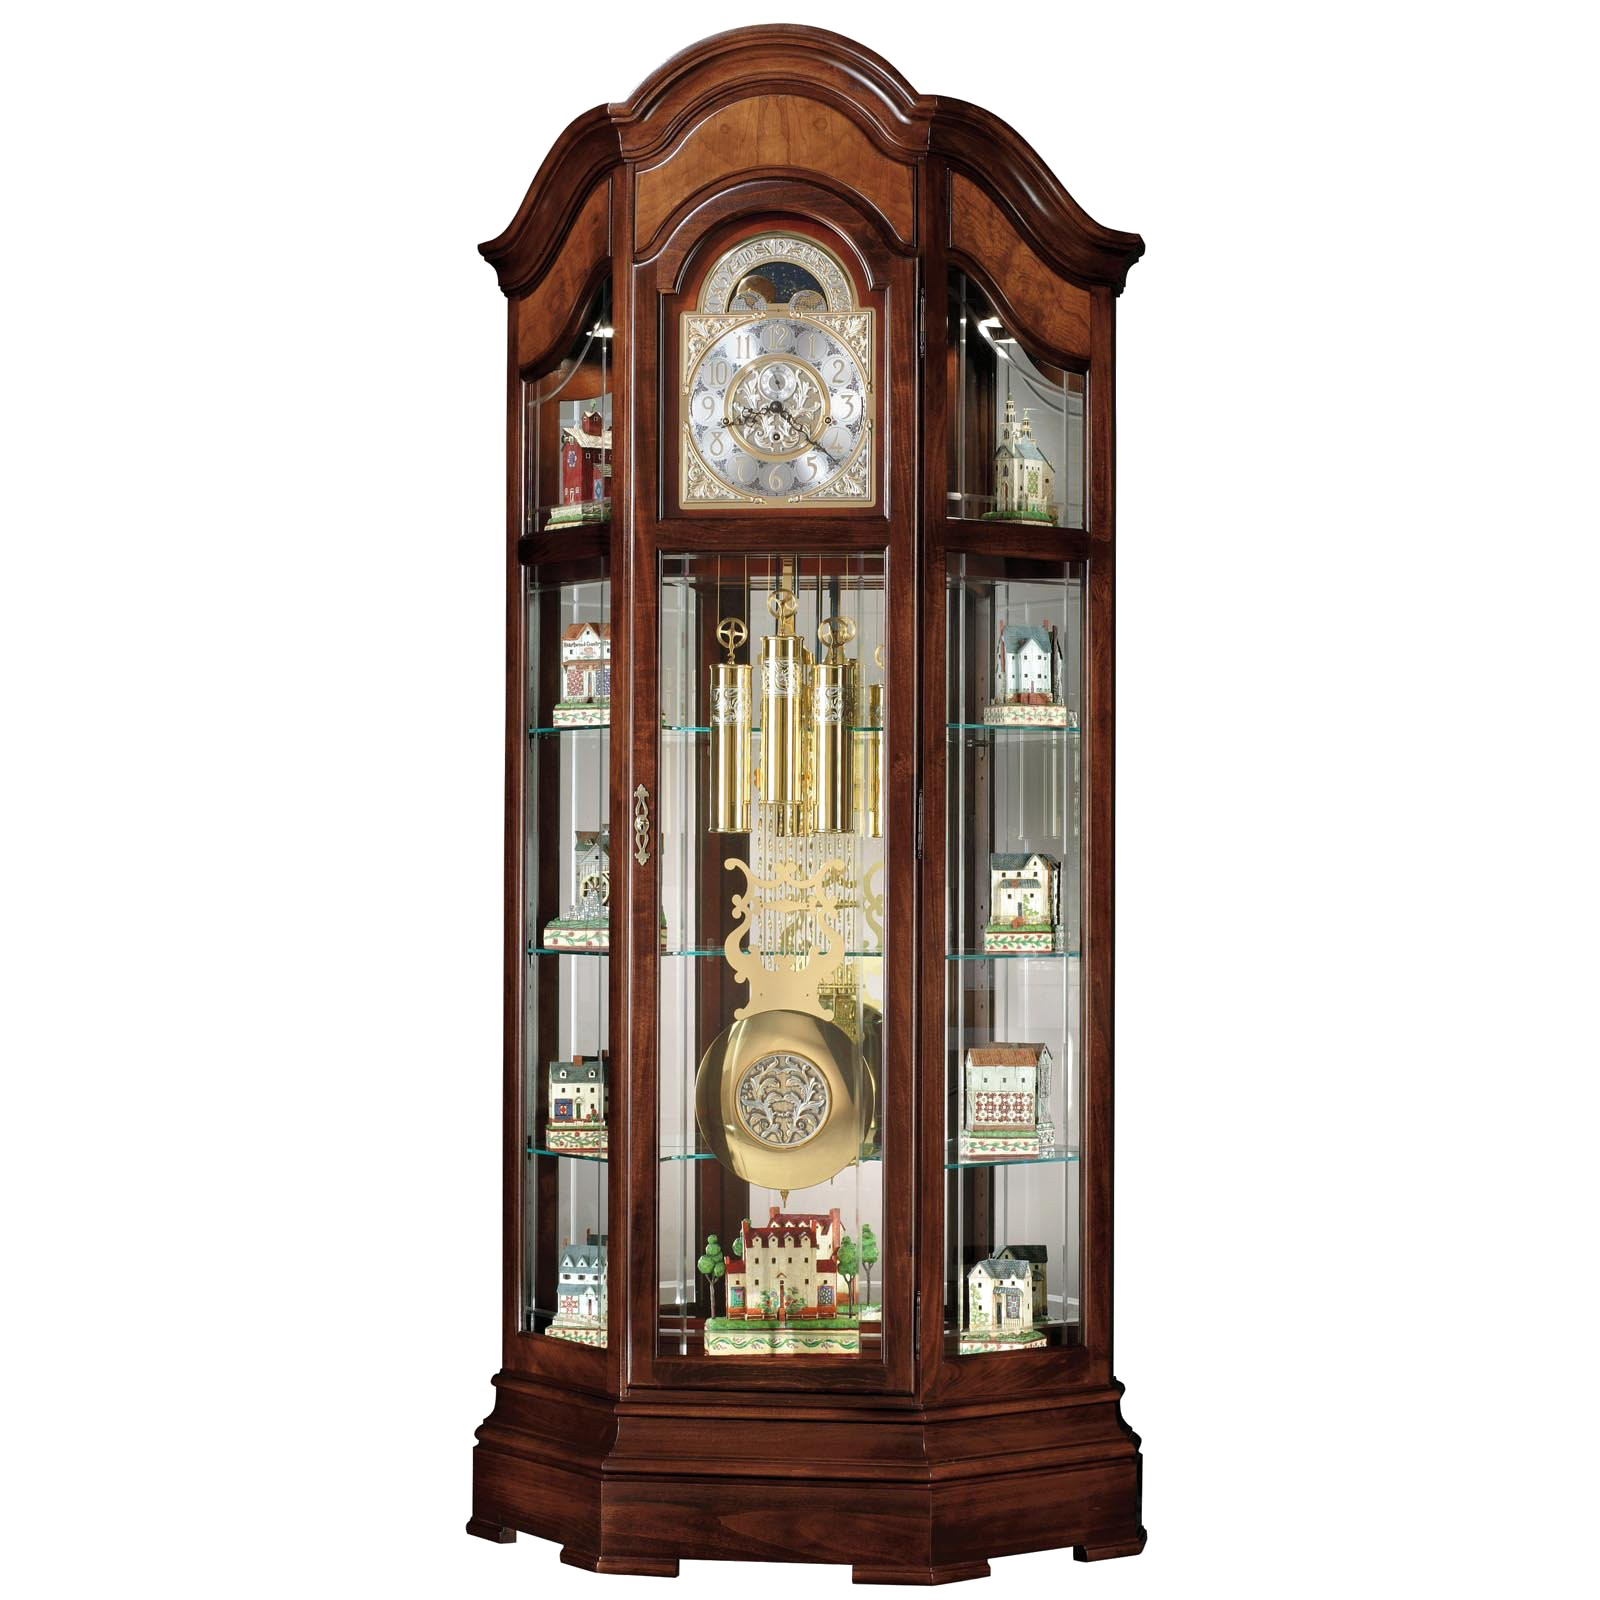 Grandfather Clock Photos PNG Image High Quality PNG Image